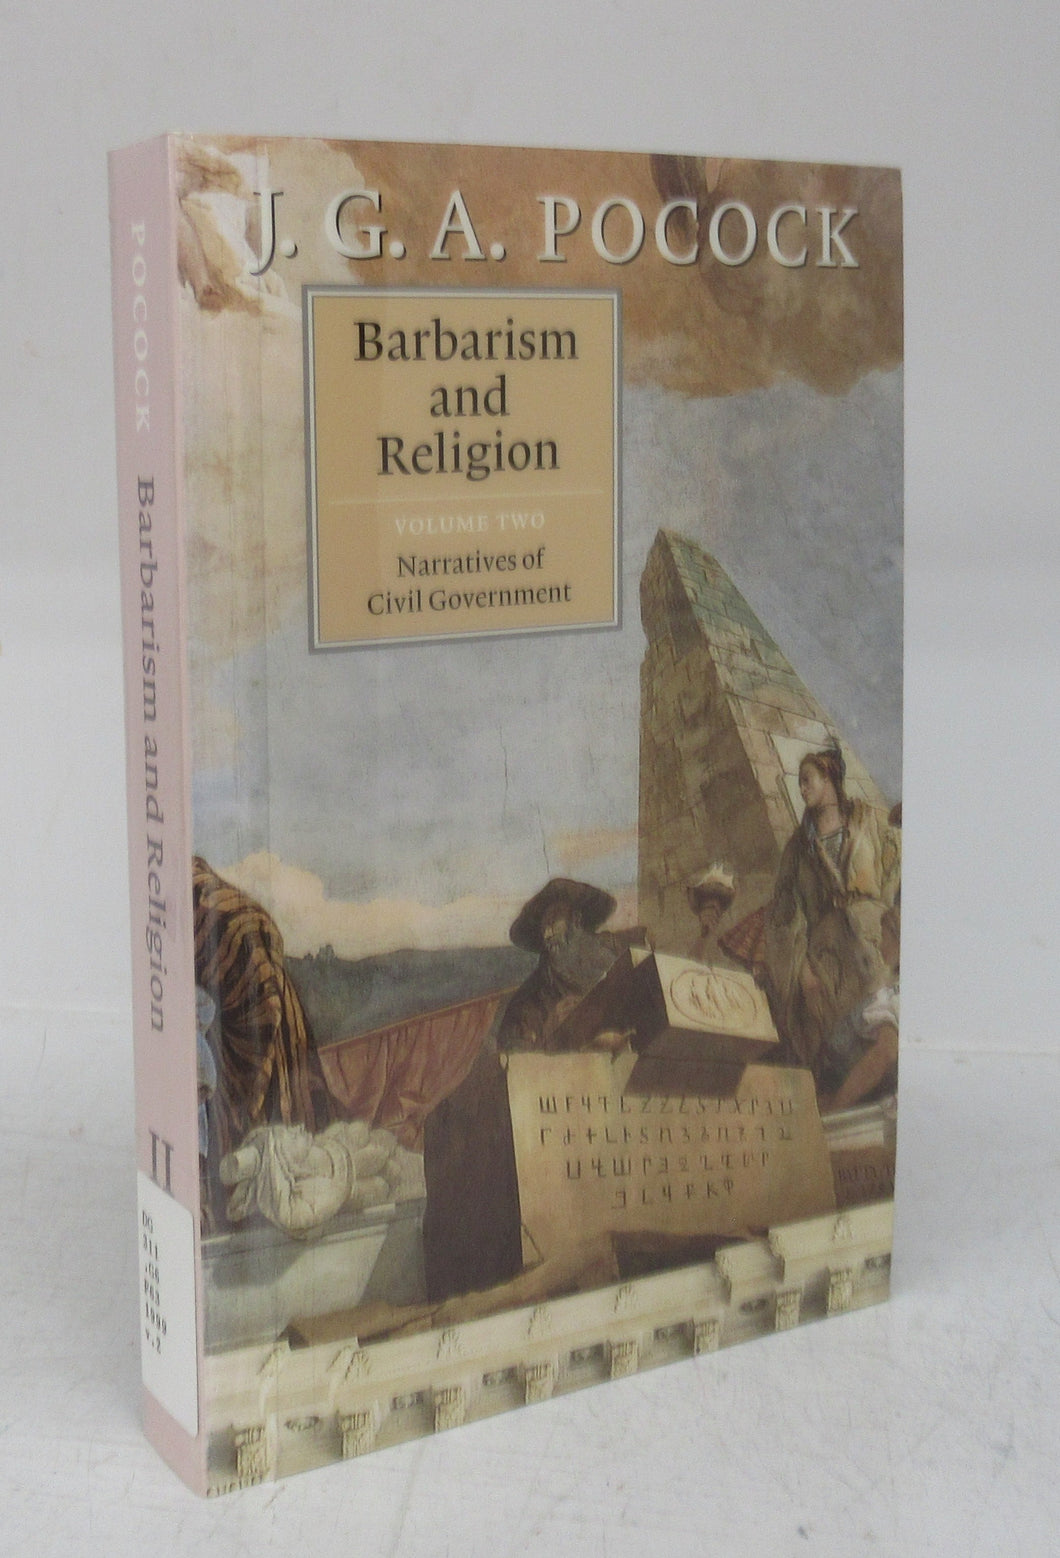 Barbarism and Religion Volume Two: Narratives of Civil Government